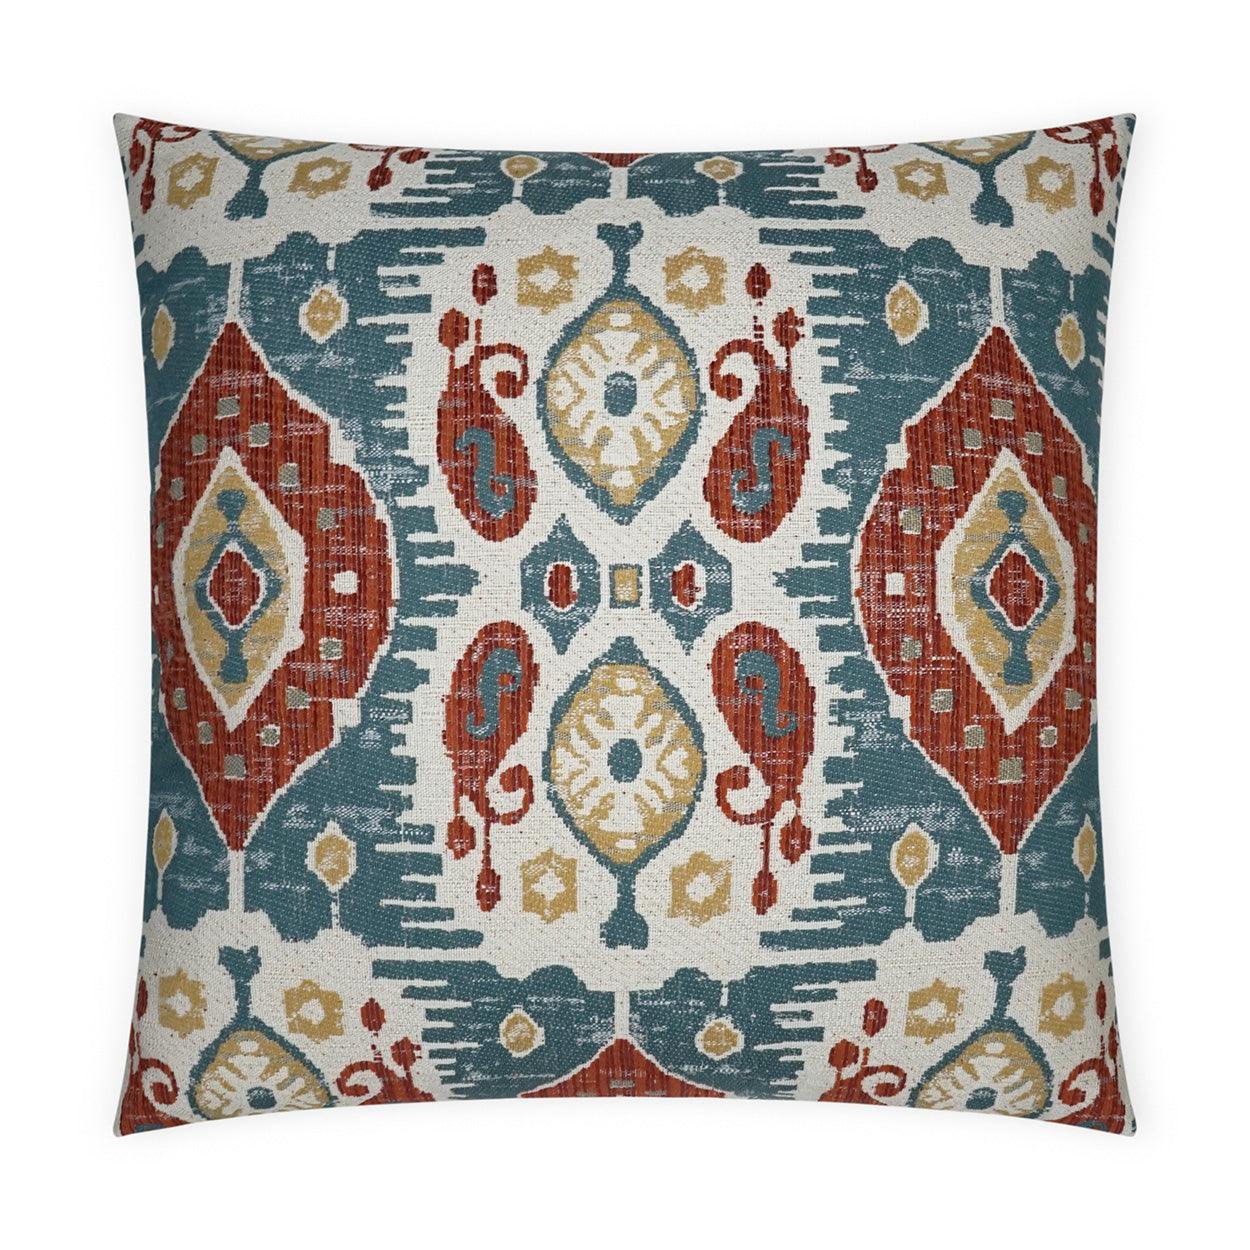 Navone Heirloom Red Turquoise Teal Large Throw Pillow With Insert - Uptown Sebastian